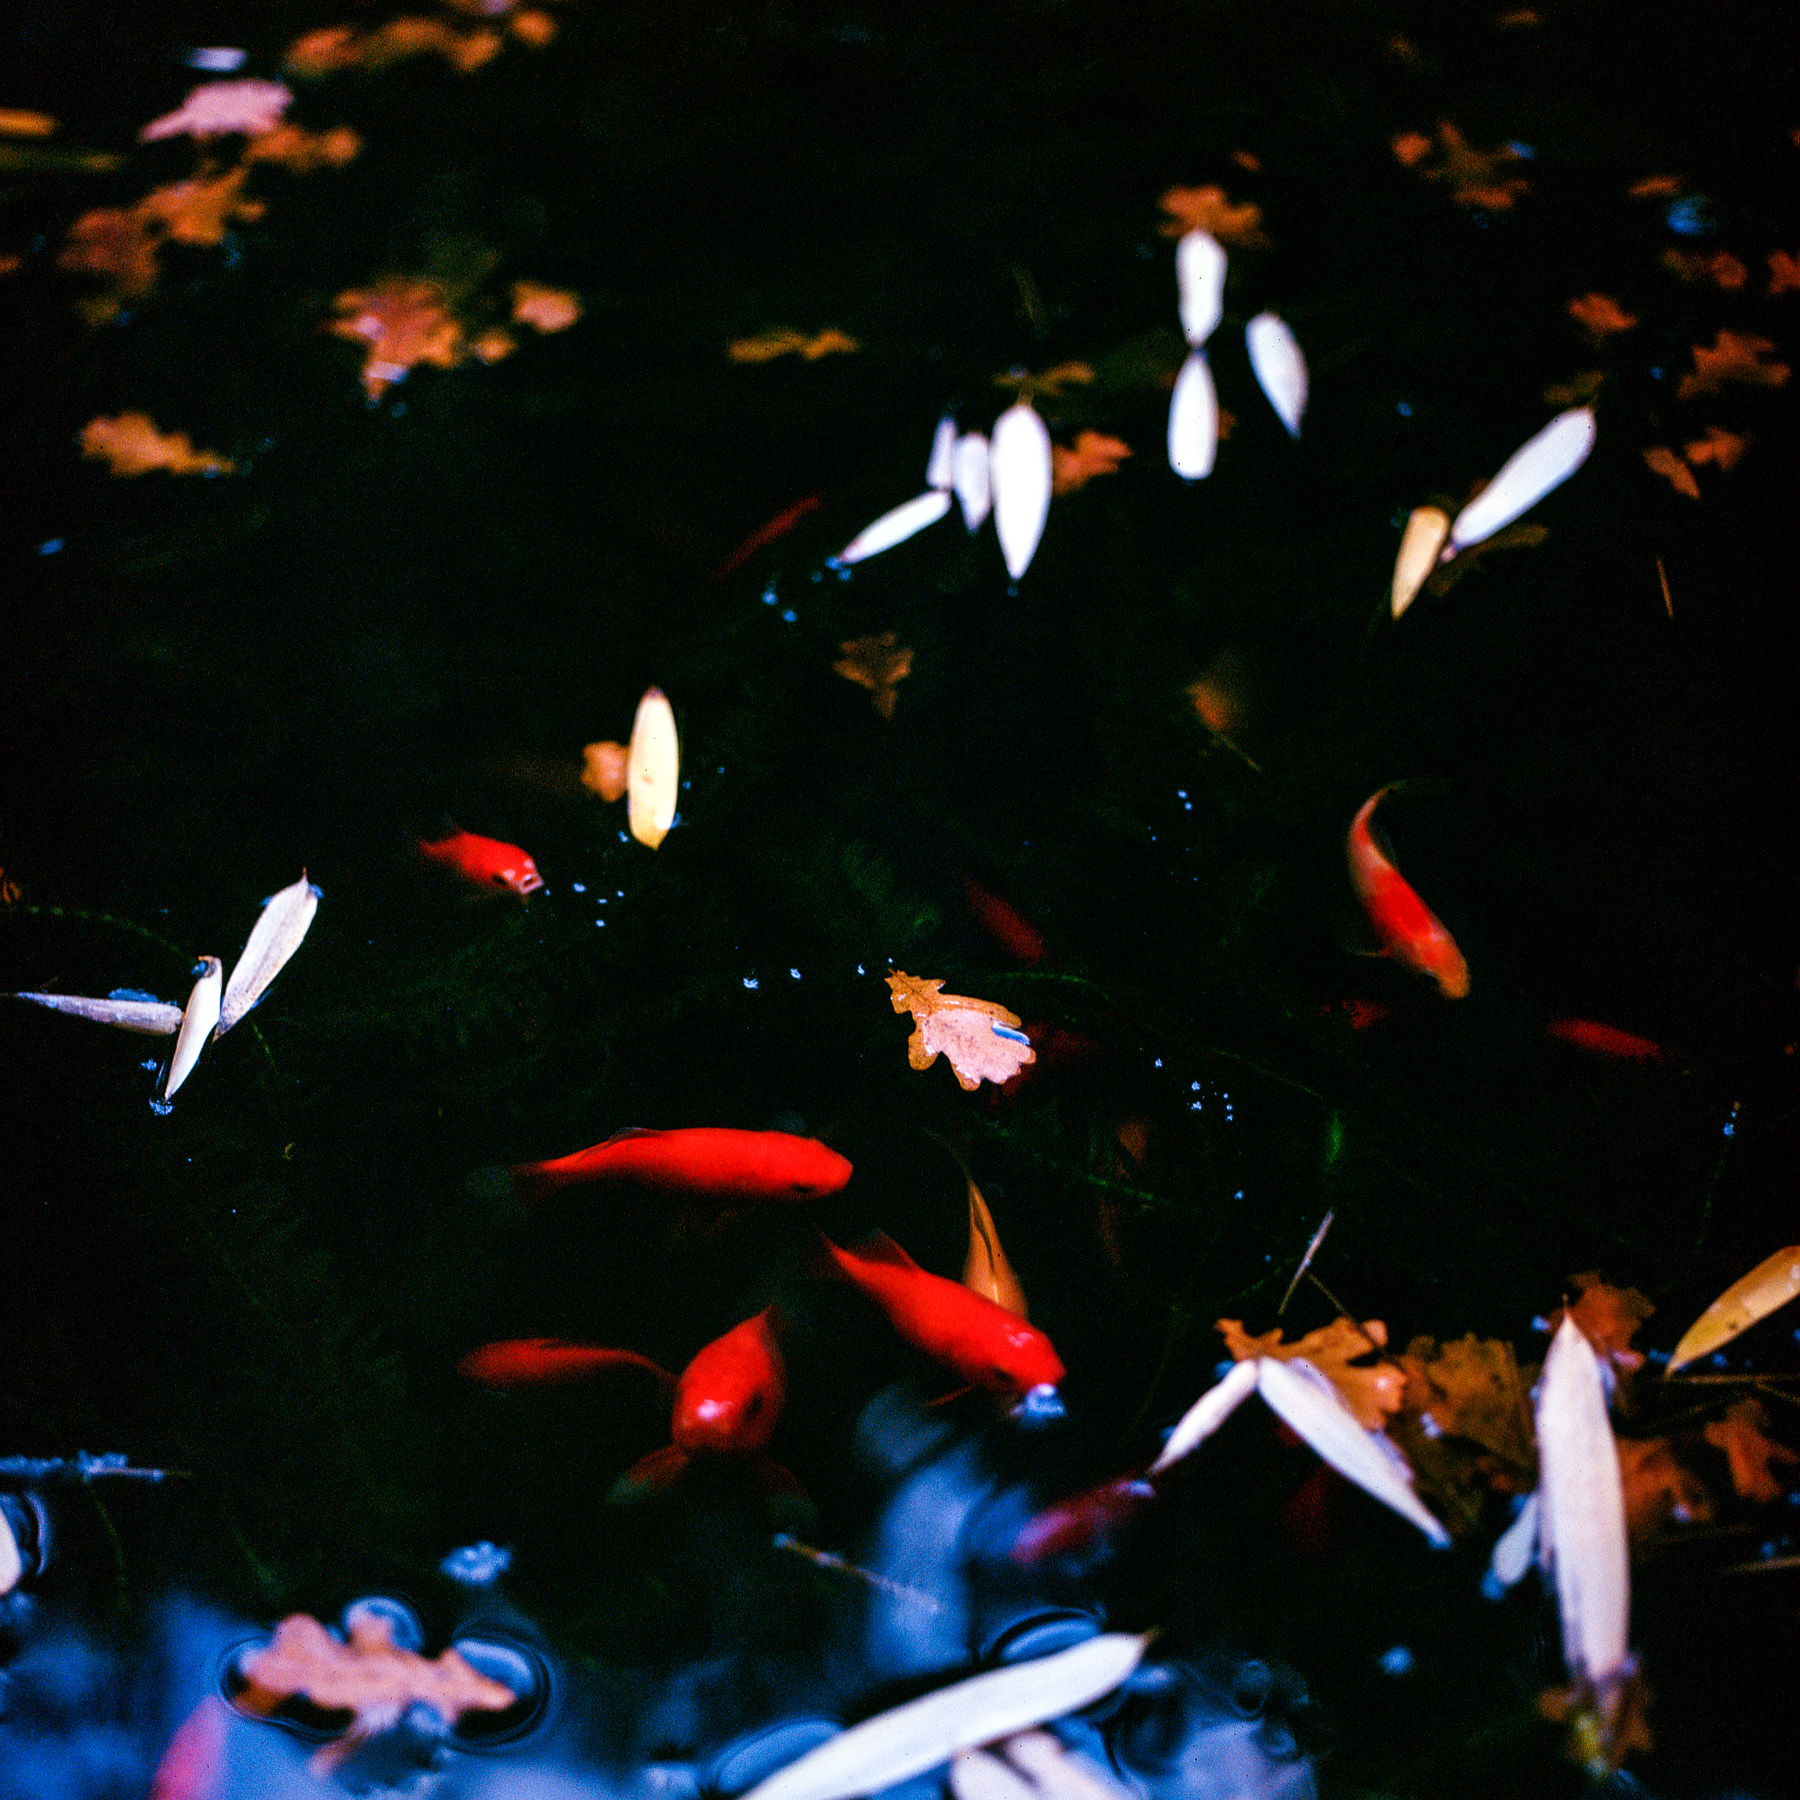 Red fishes in the pond